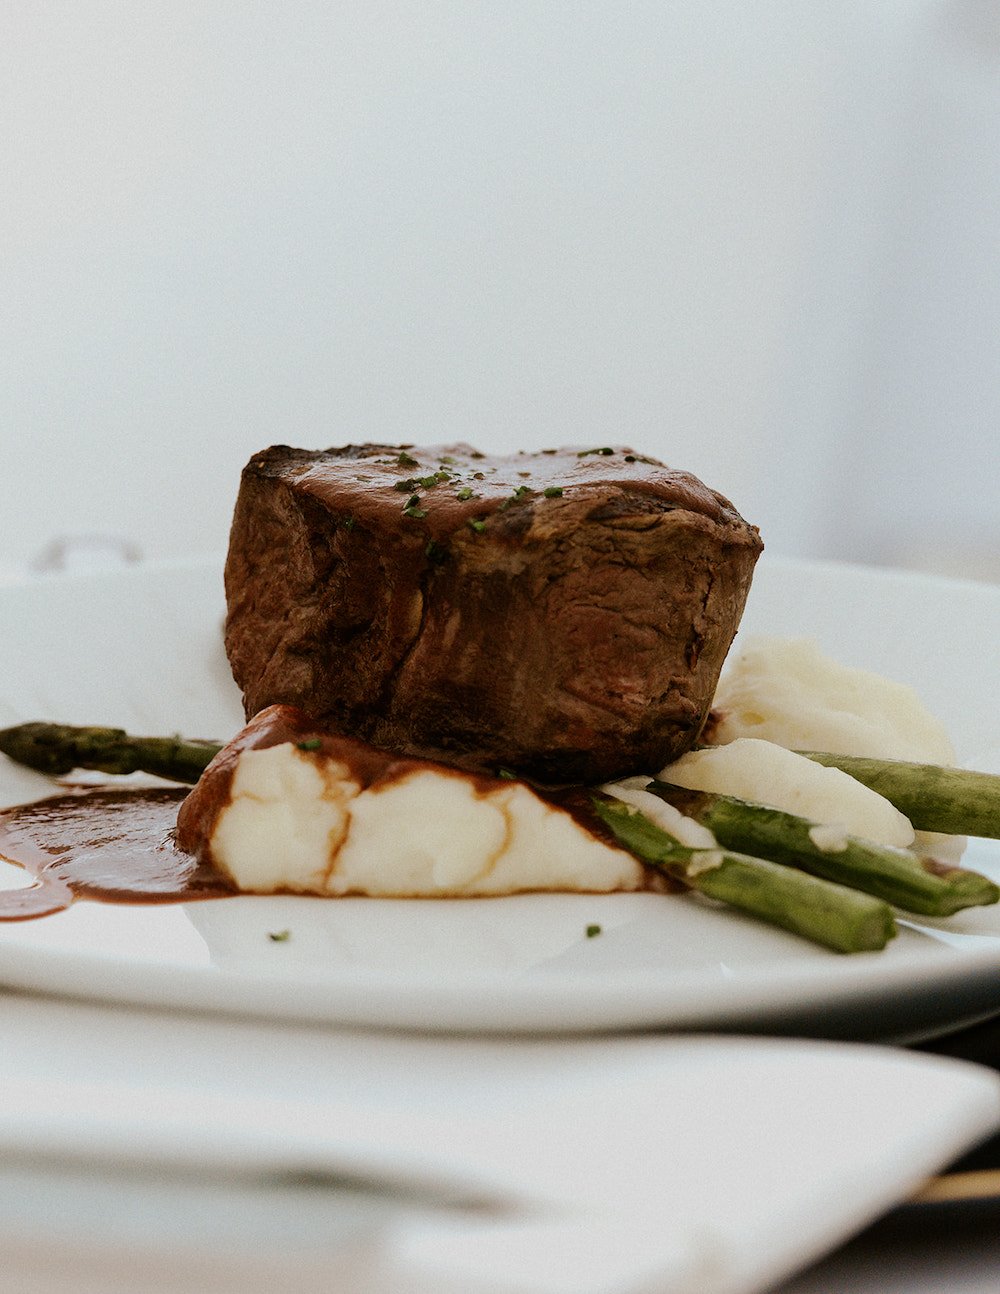 Filet over a mashed potato with asparagus and gravy